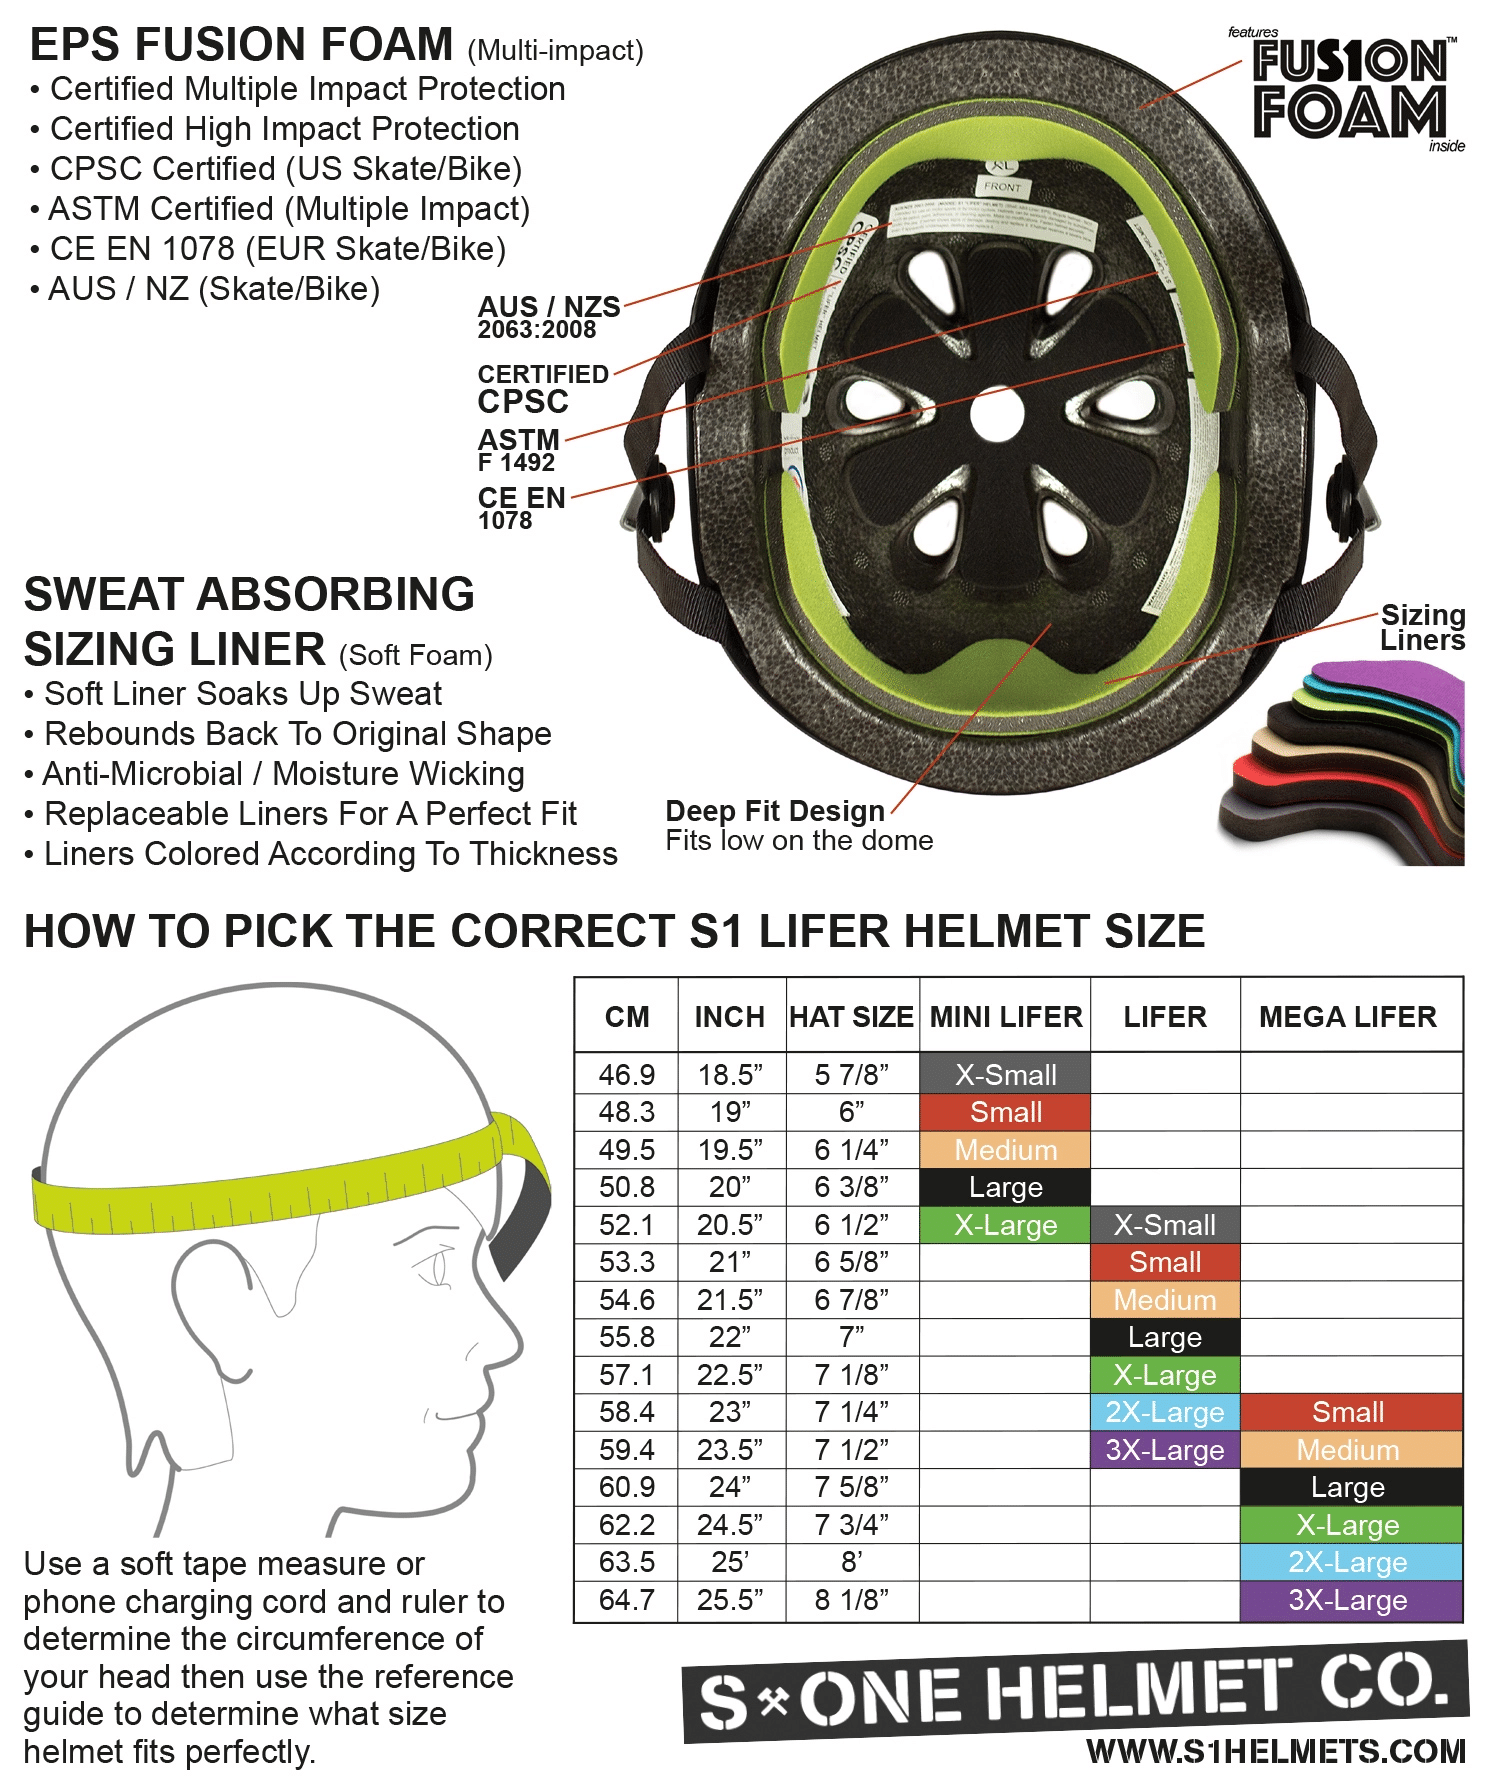 Example of e-commerce website providing detailed feature information on helmet selection